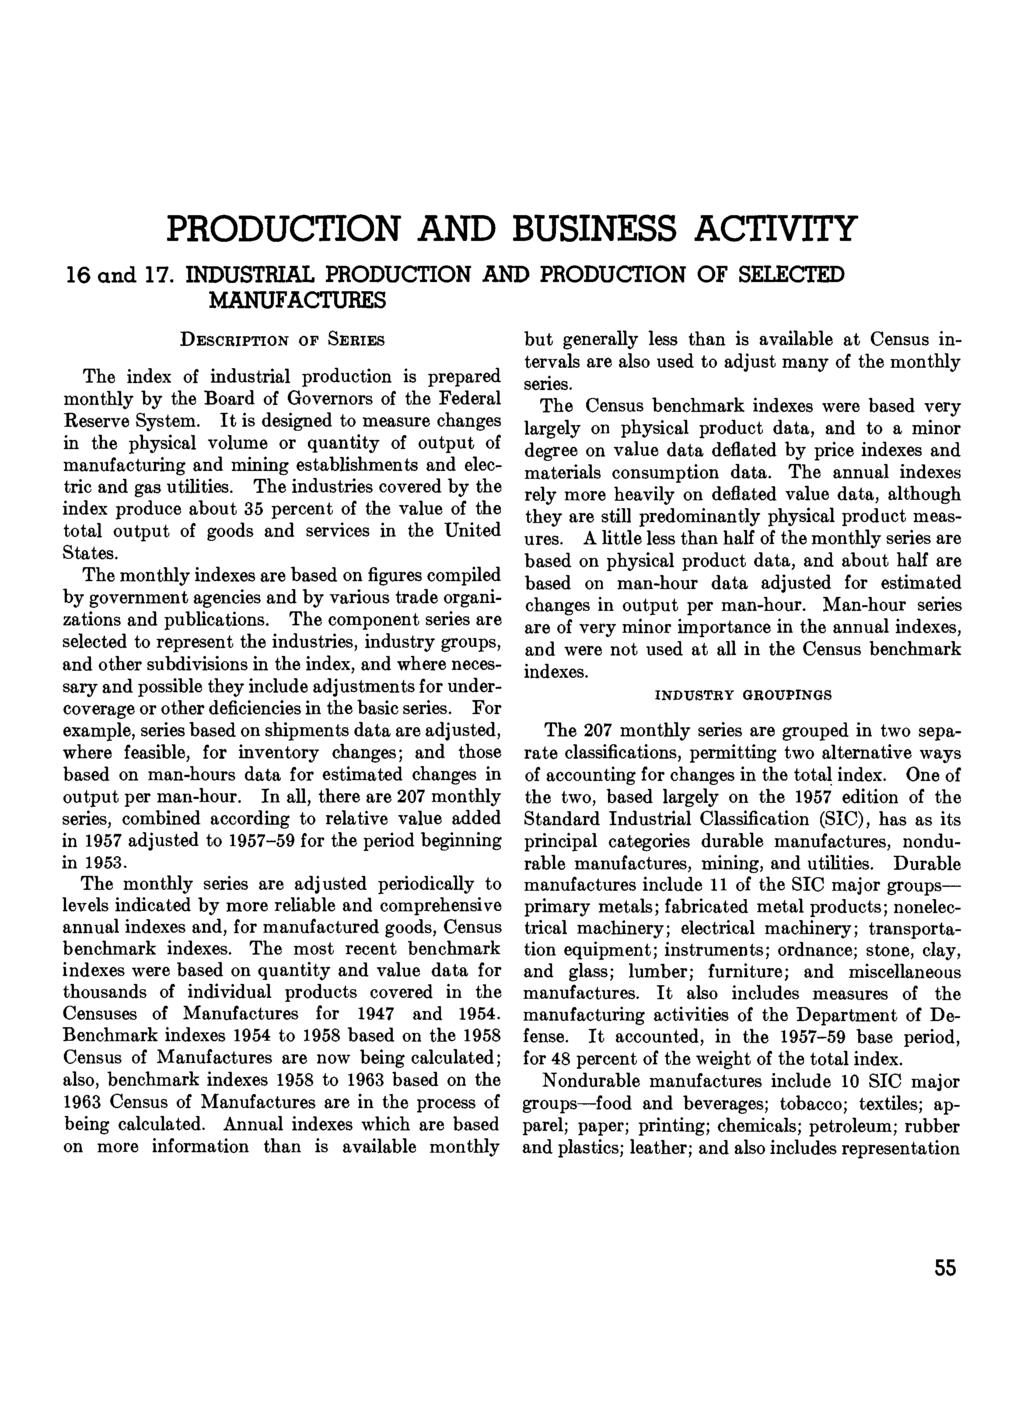 PRODUCTION AND BUSINESS ACTIVITY 16 and 17.